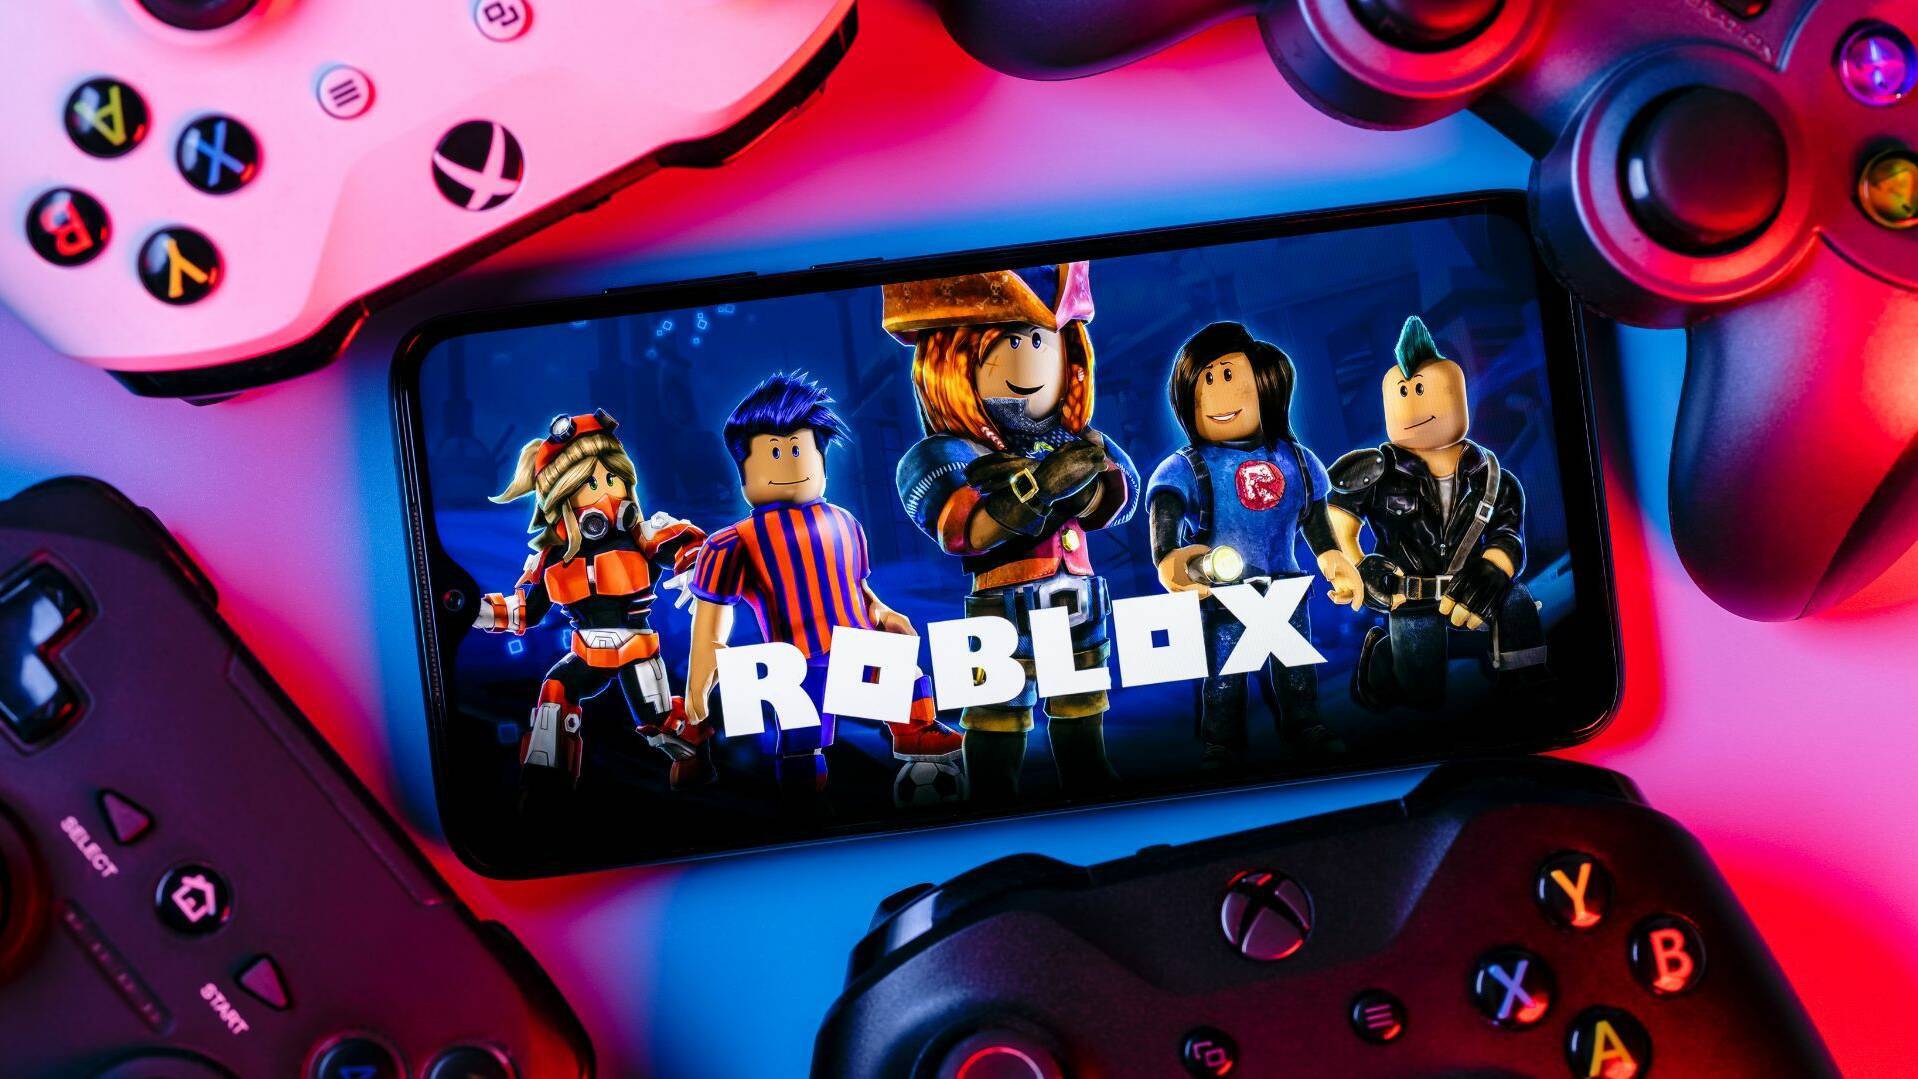 Extremists creep into Roblox, an online game popular with children